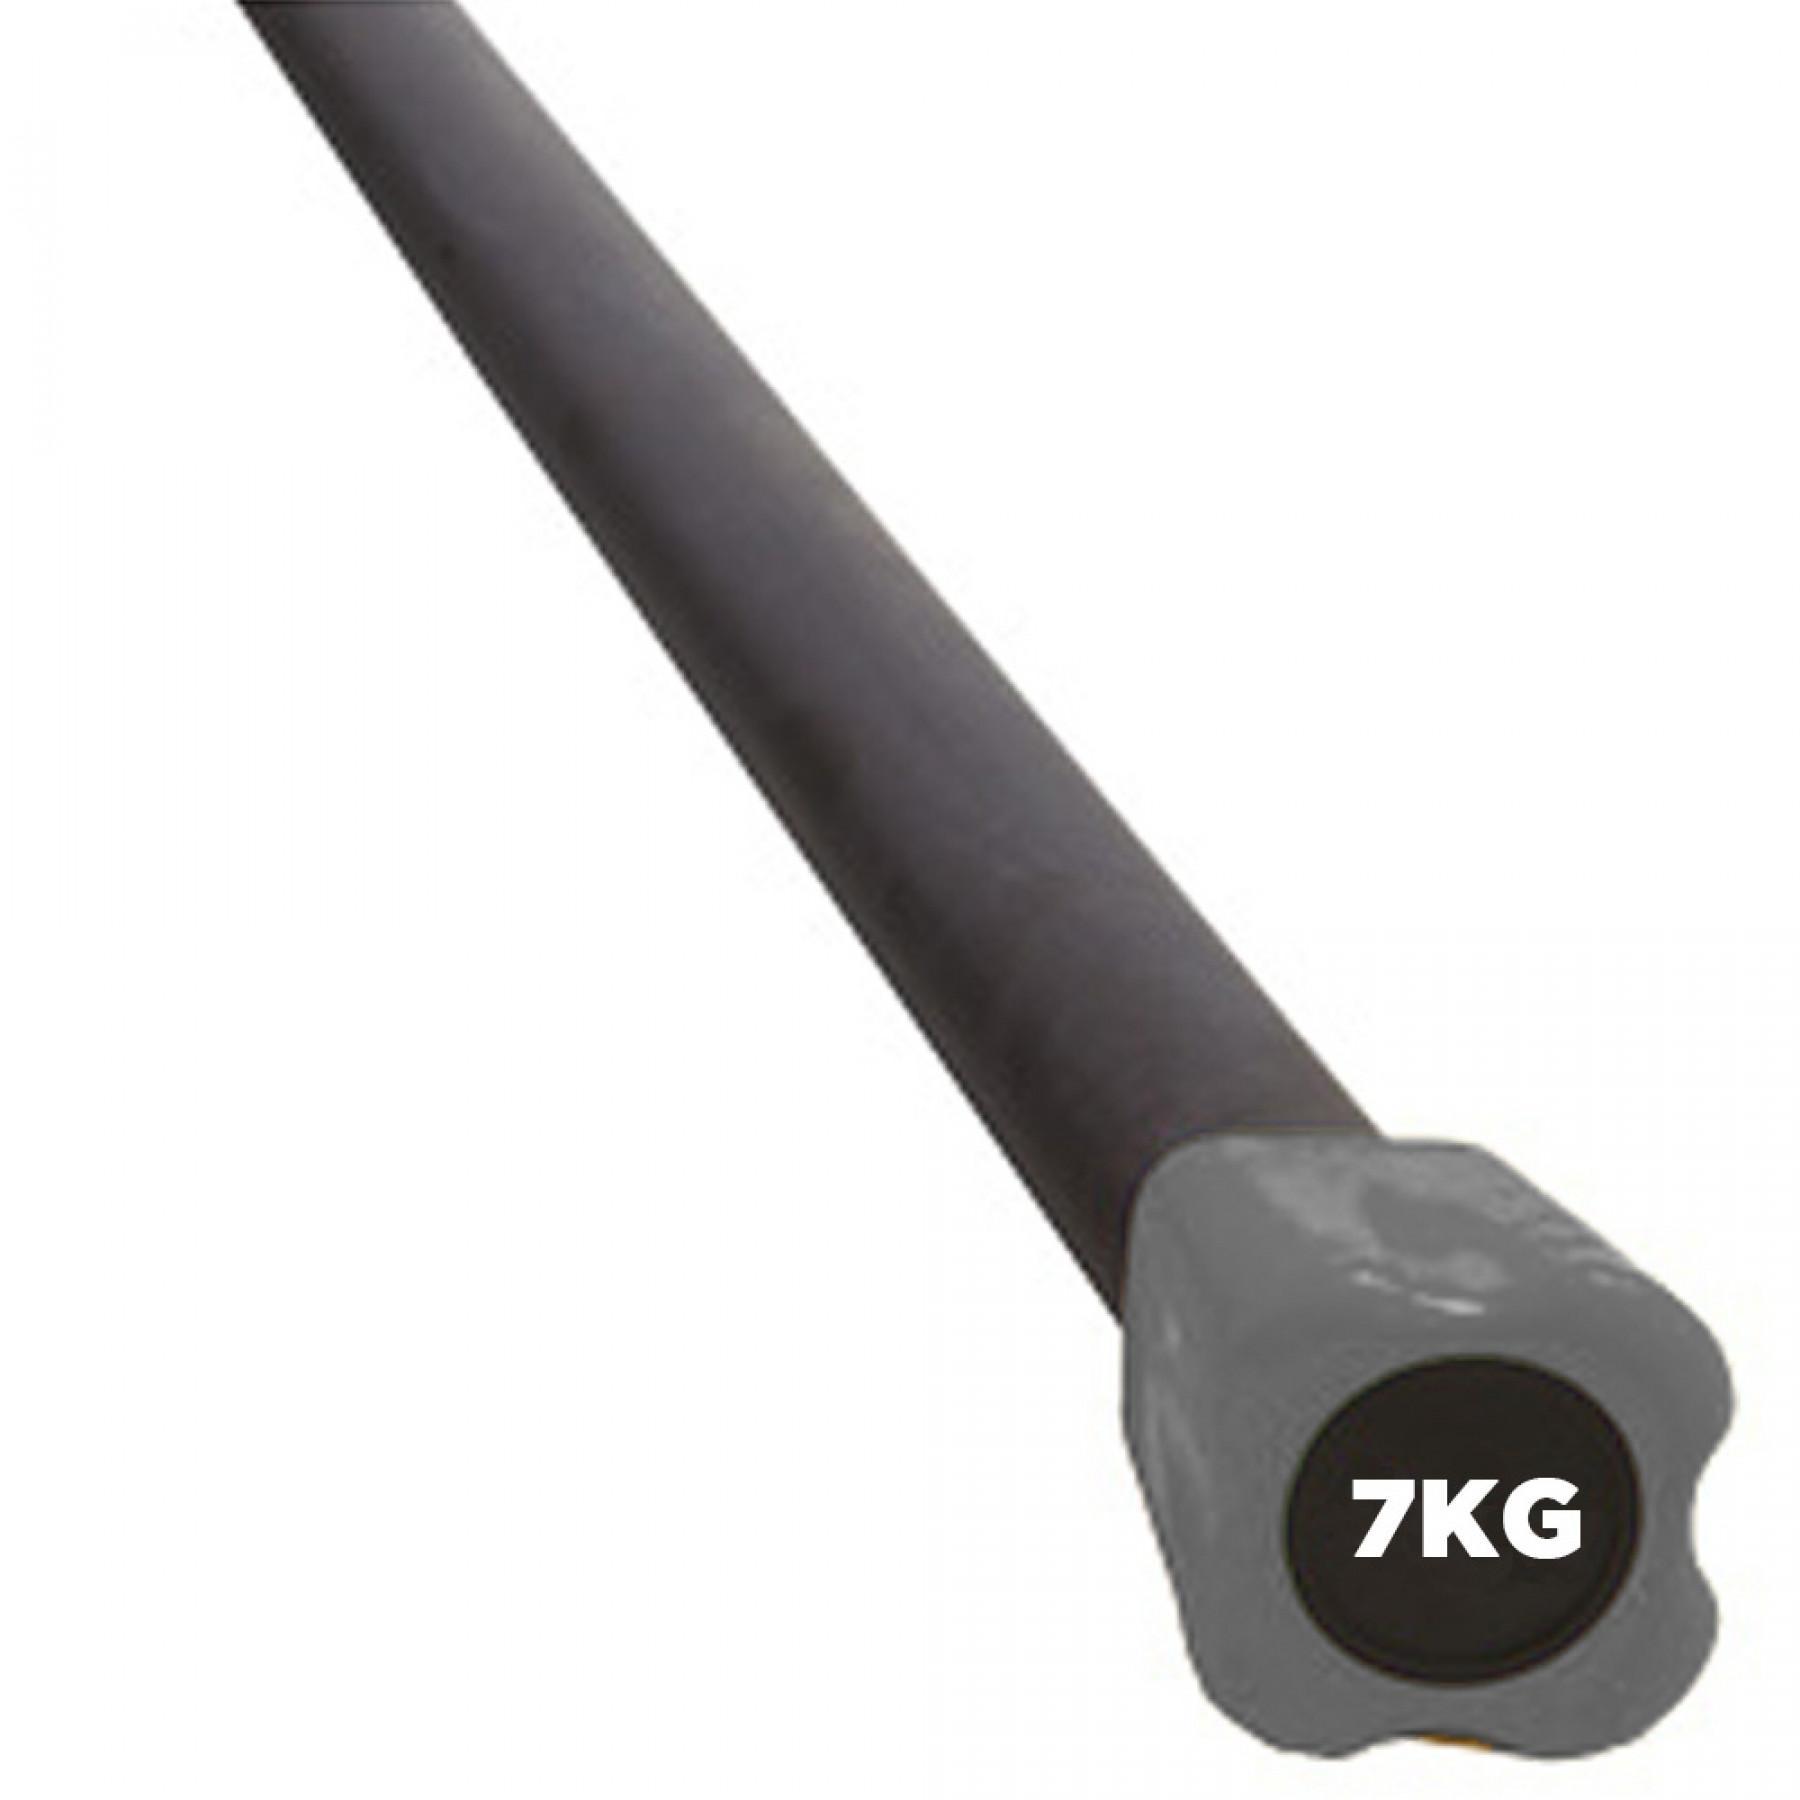 Weighted bar Leader Fit 30mm 7kg